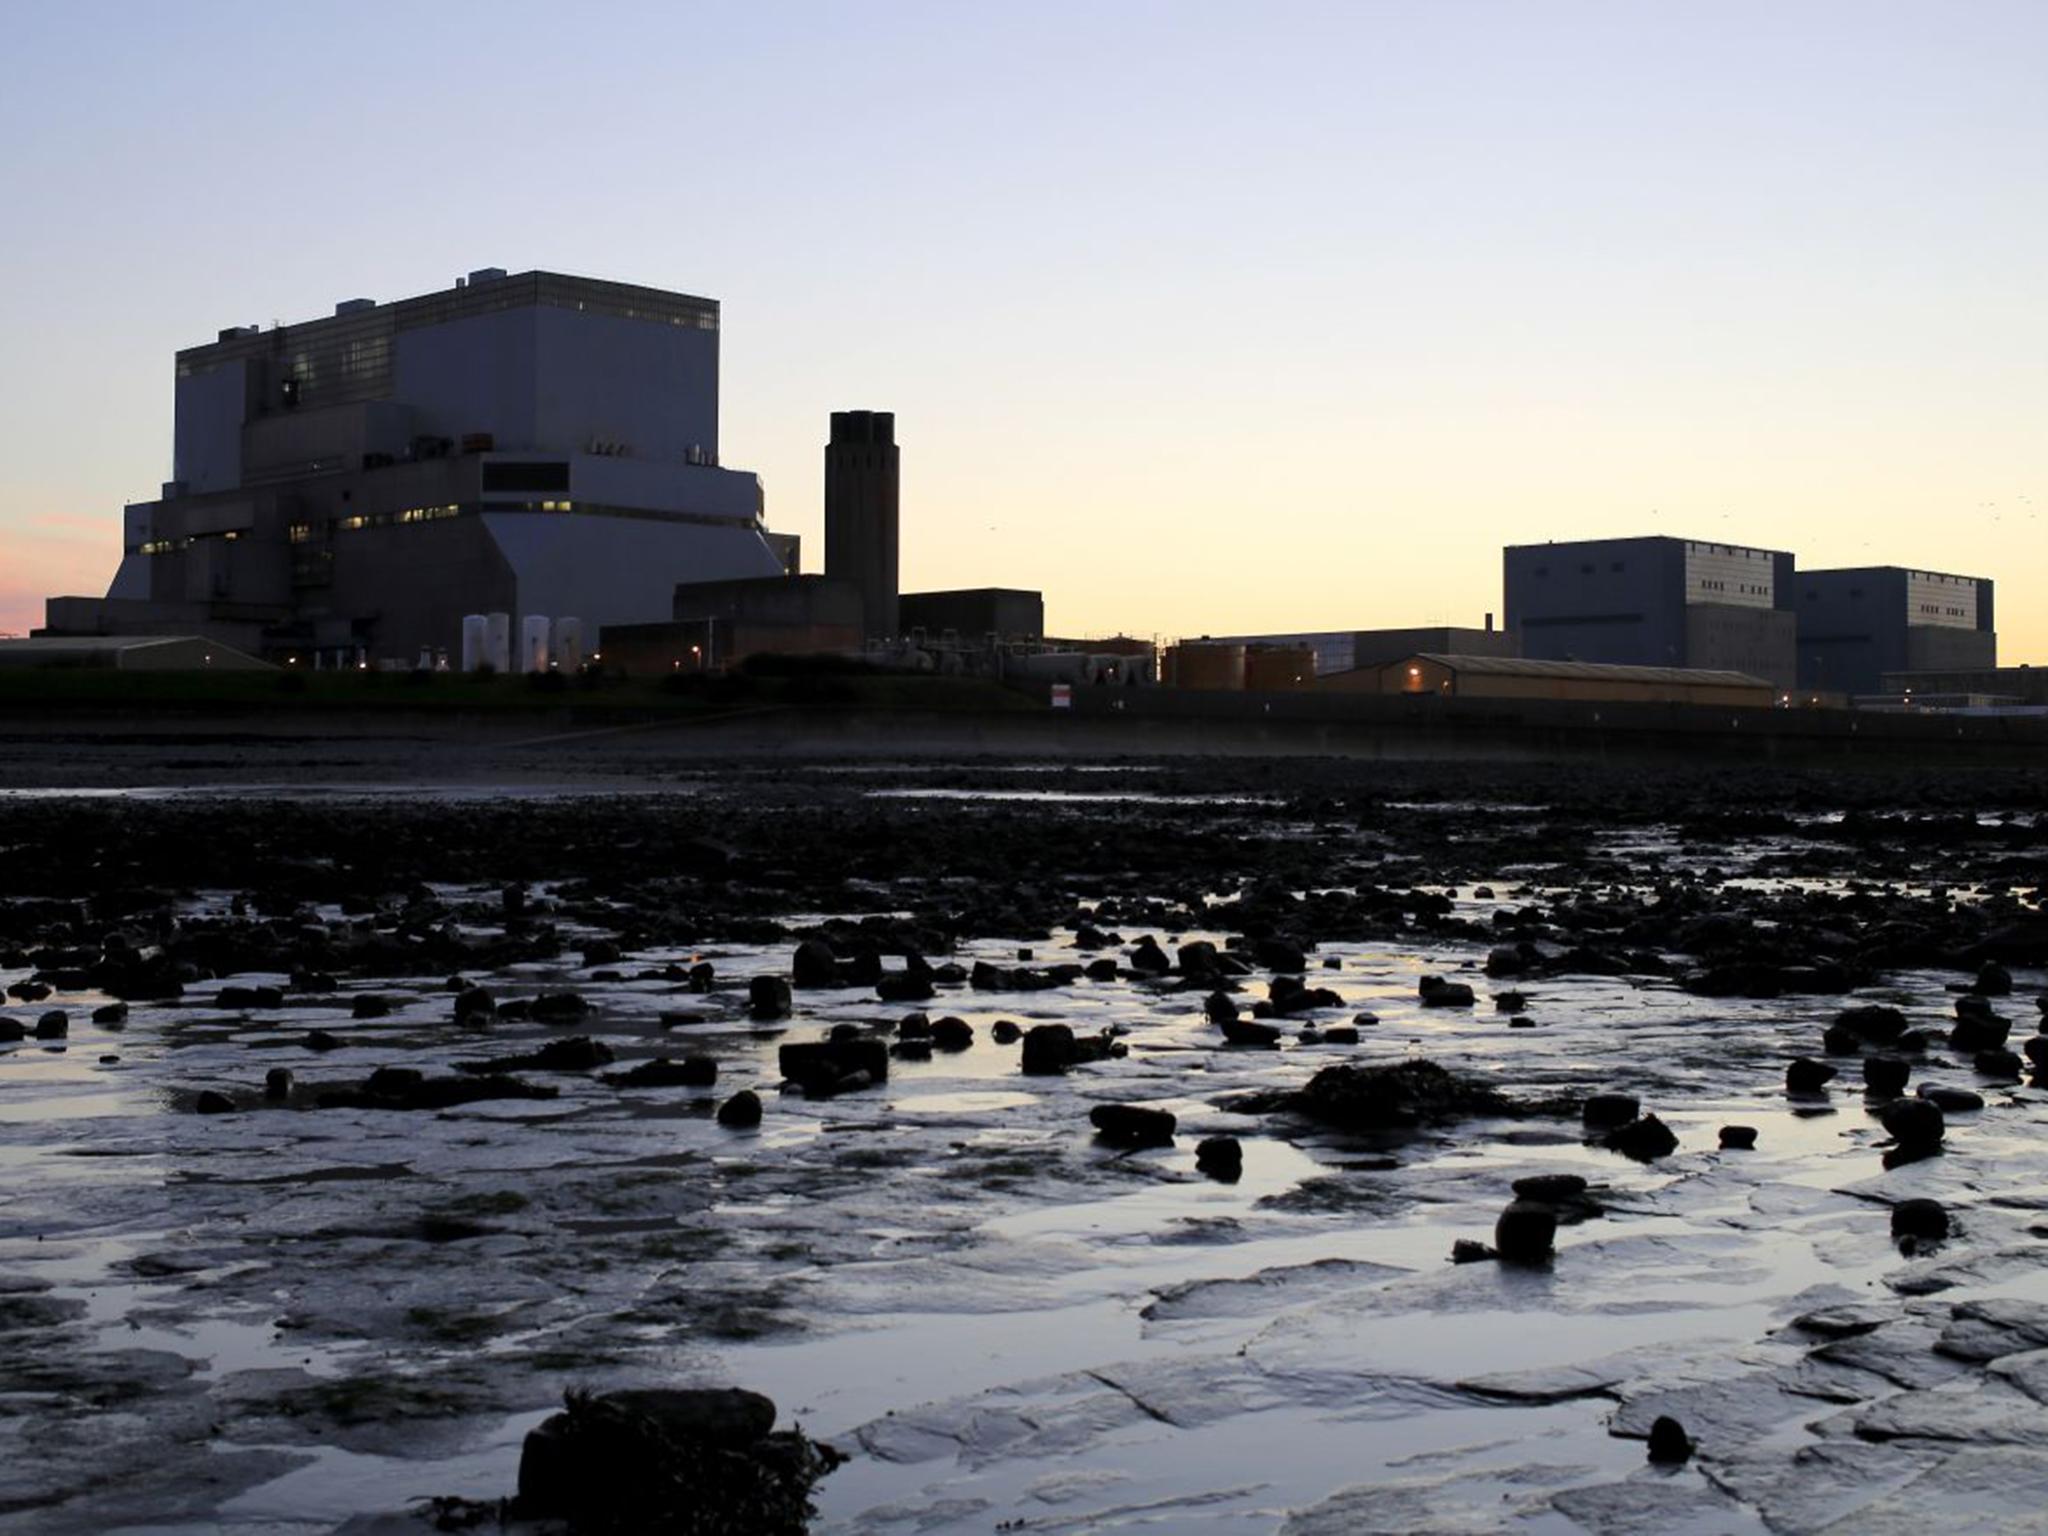 If built, the nuclear plant could potentially produce up to 7 per cent of the UK’s electricity needs